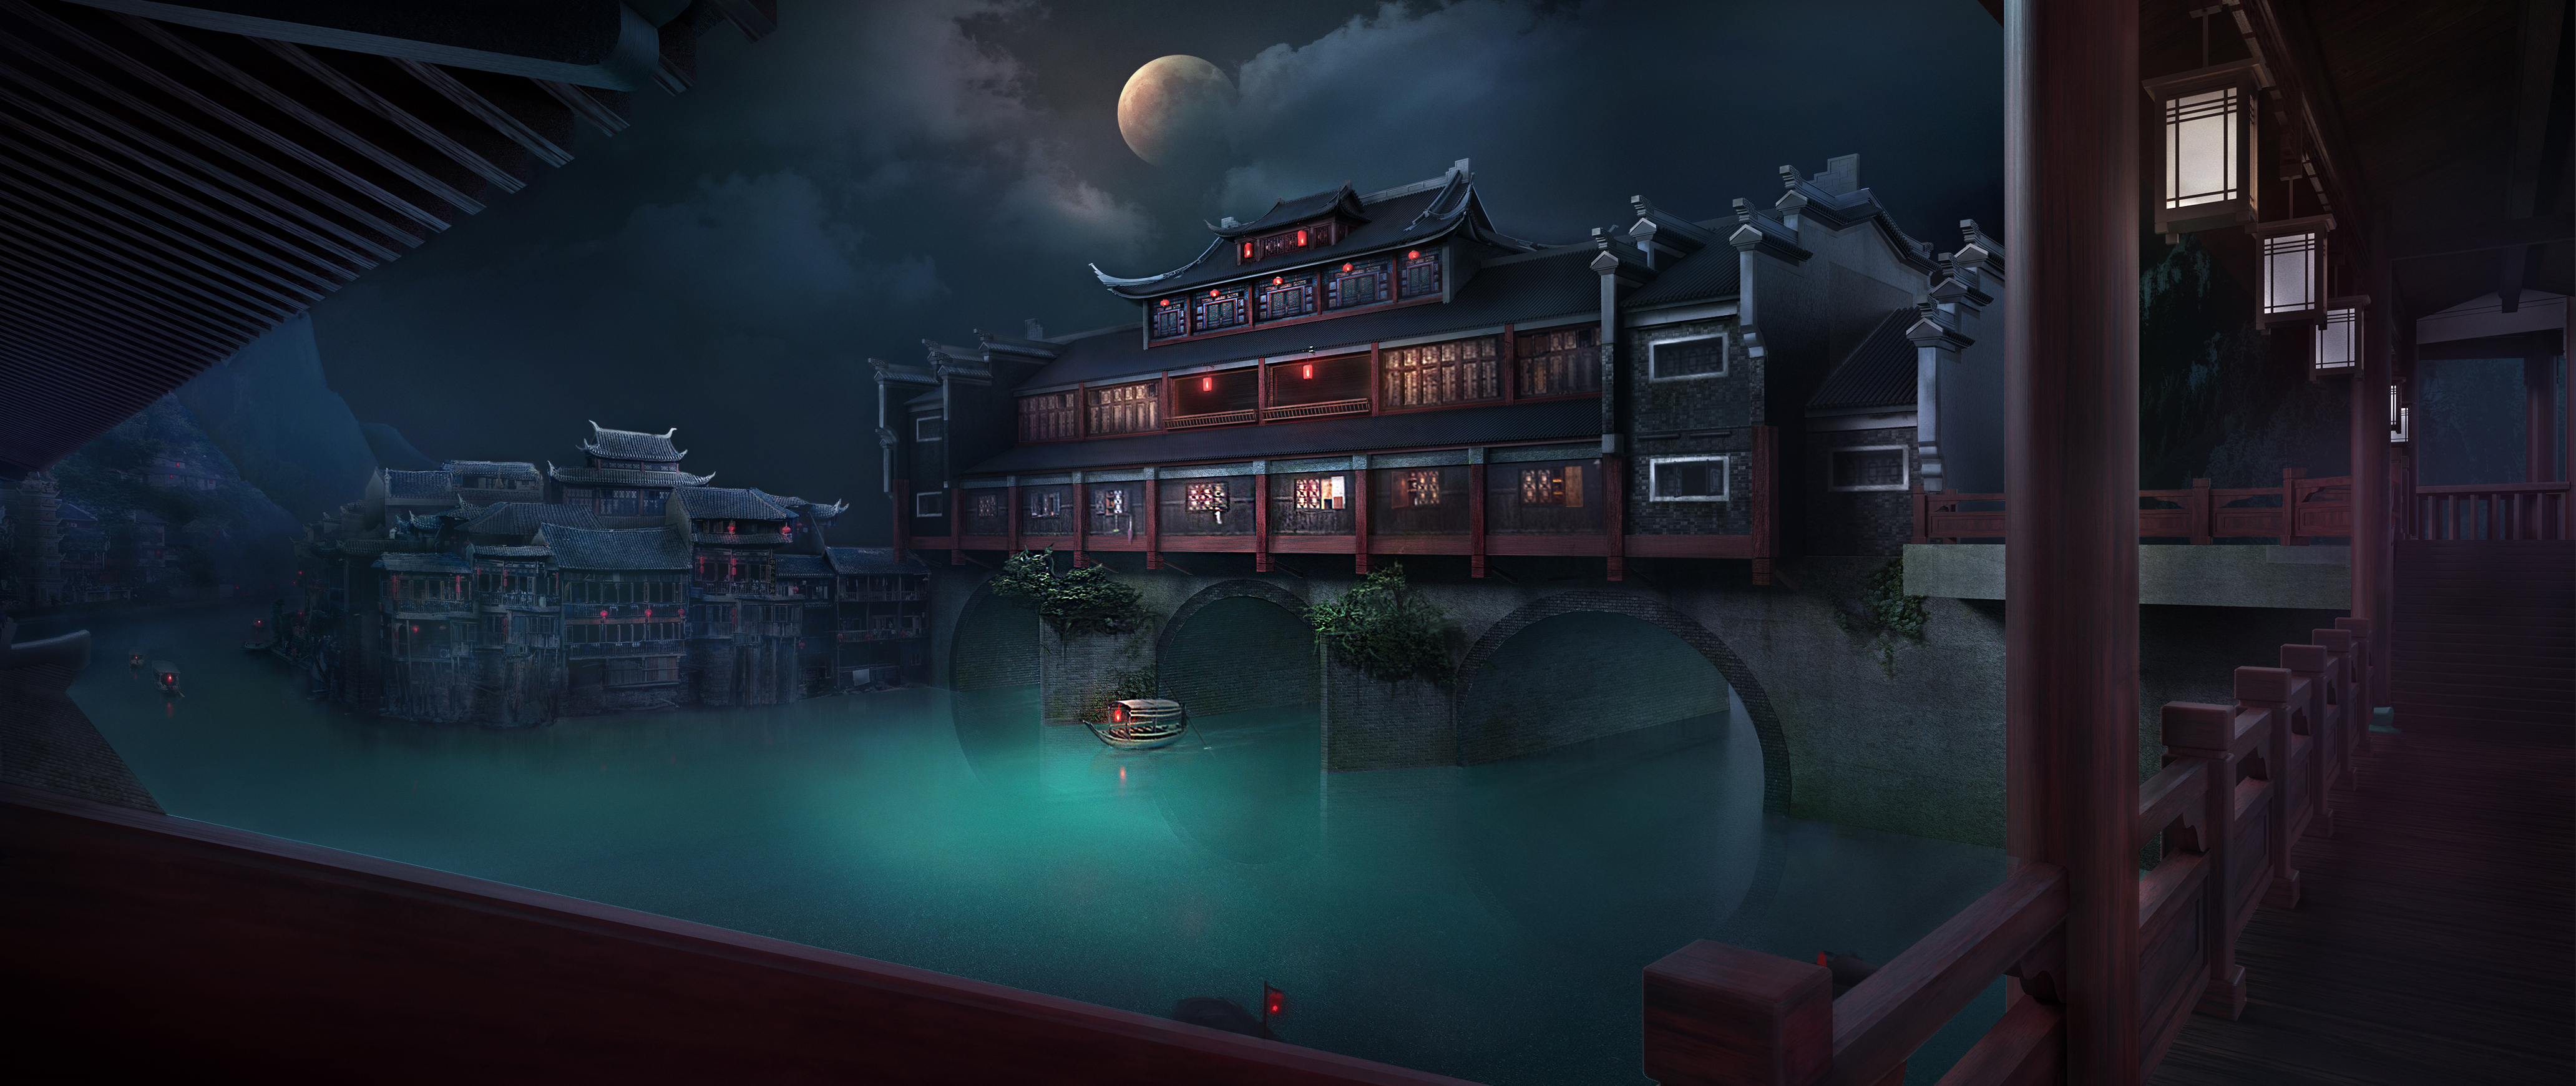 General 4128x1740 ferry water moon phases Asian architecture night